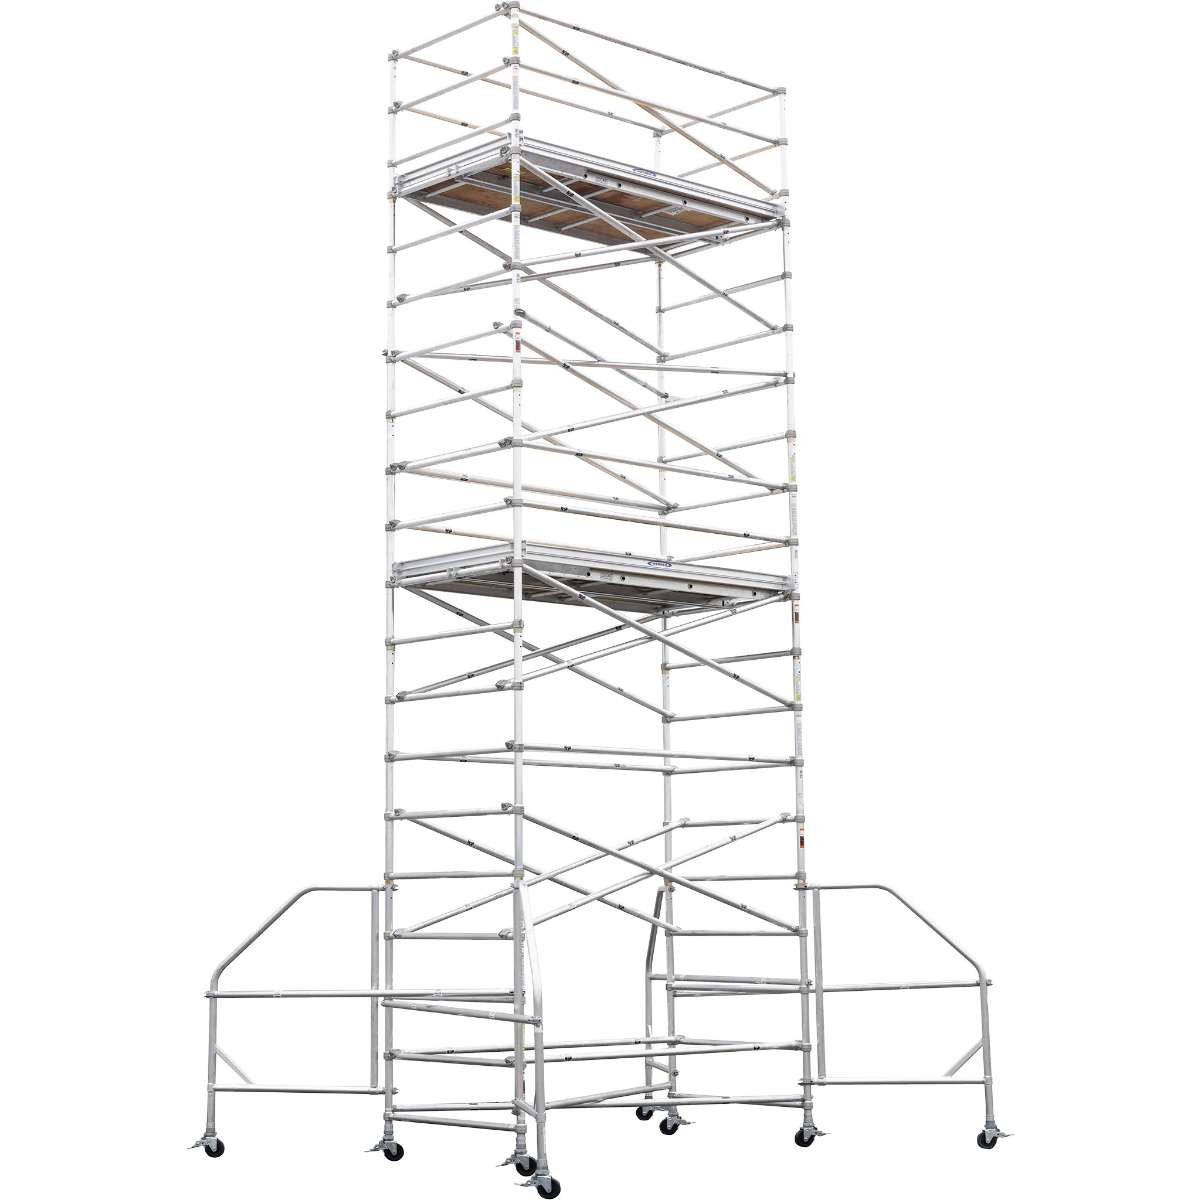 Scaffold Tower Rental Image